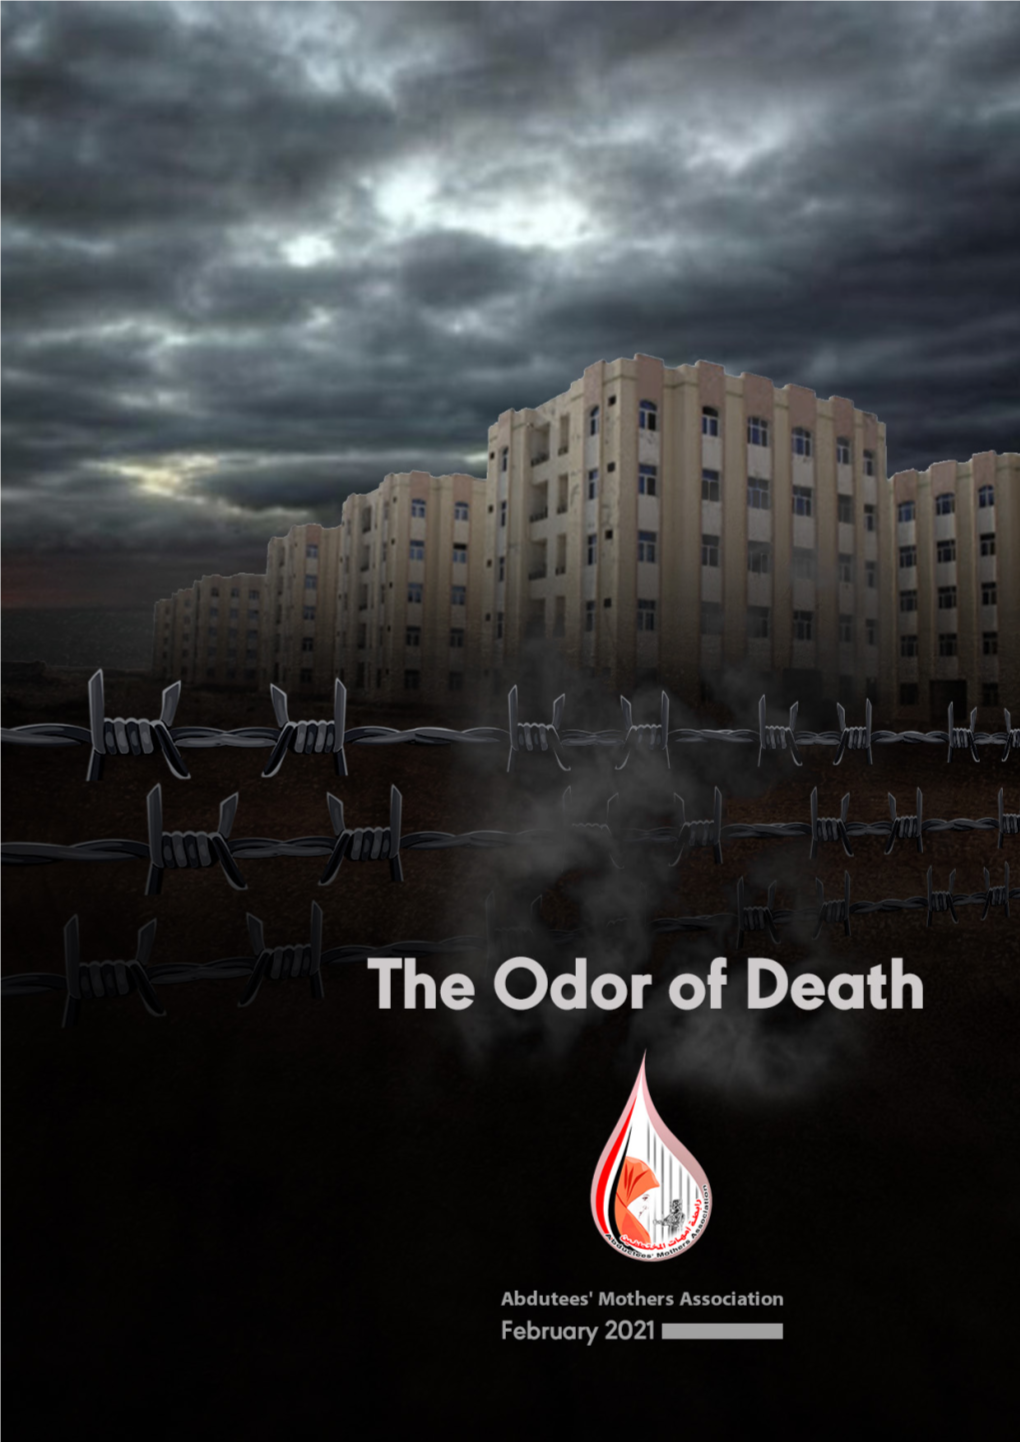 The Odor of Death